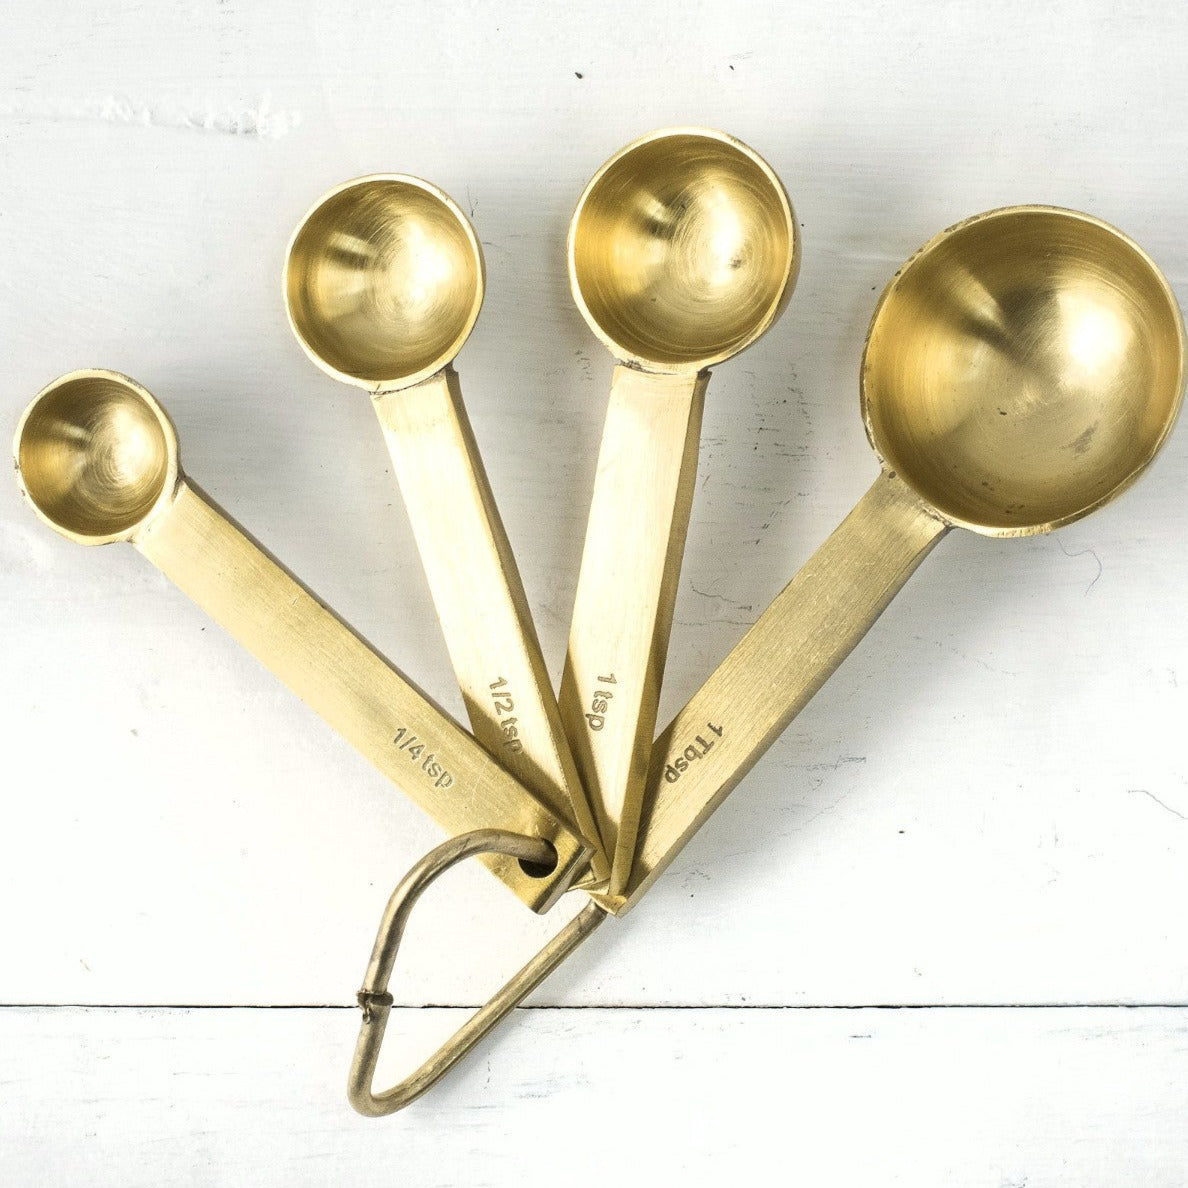 A set of ethically crafted Be Home brass measuring spoons with a food-safe coating on a wooden surface.